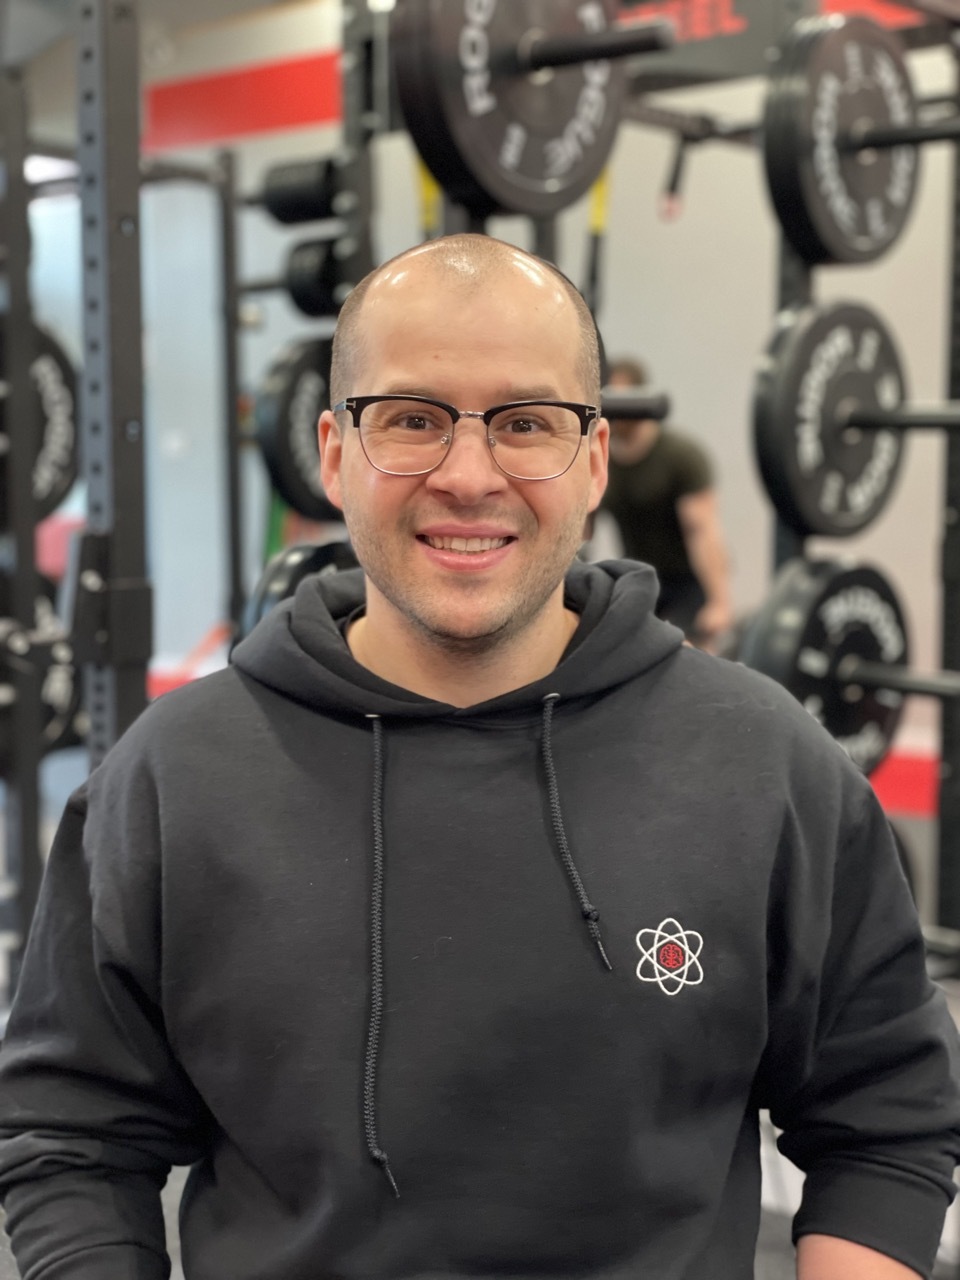 Tristan Churchward, sports therapist and private trainer at Studio Fit U, expert in injury prevention and rehabilitation, Montreal.